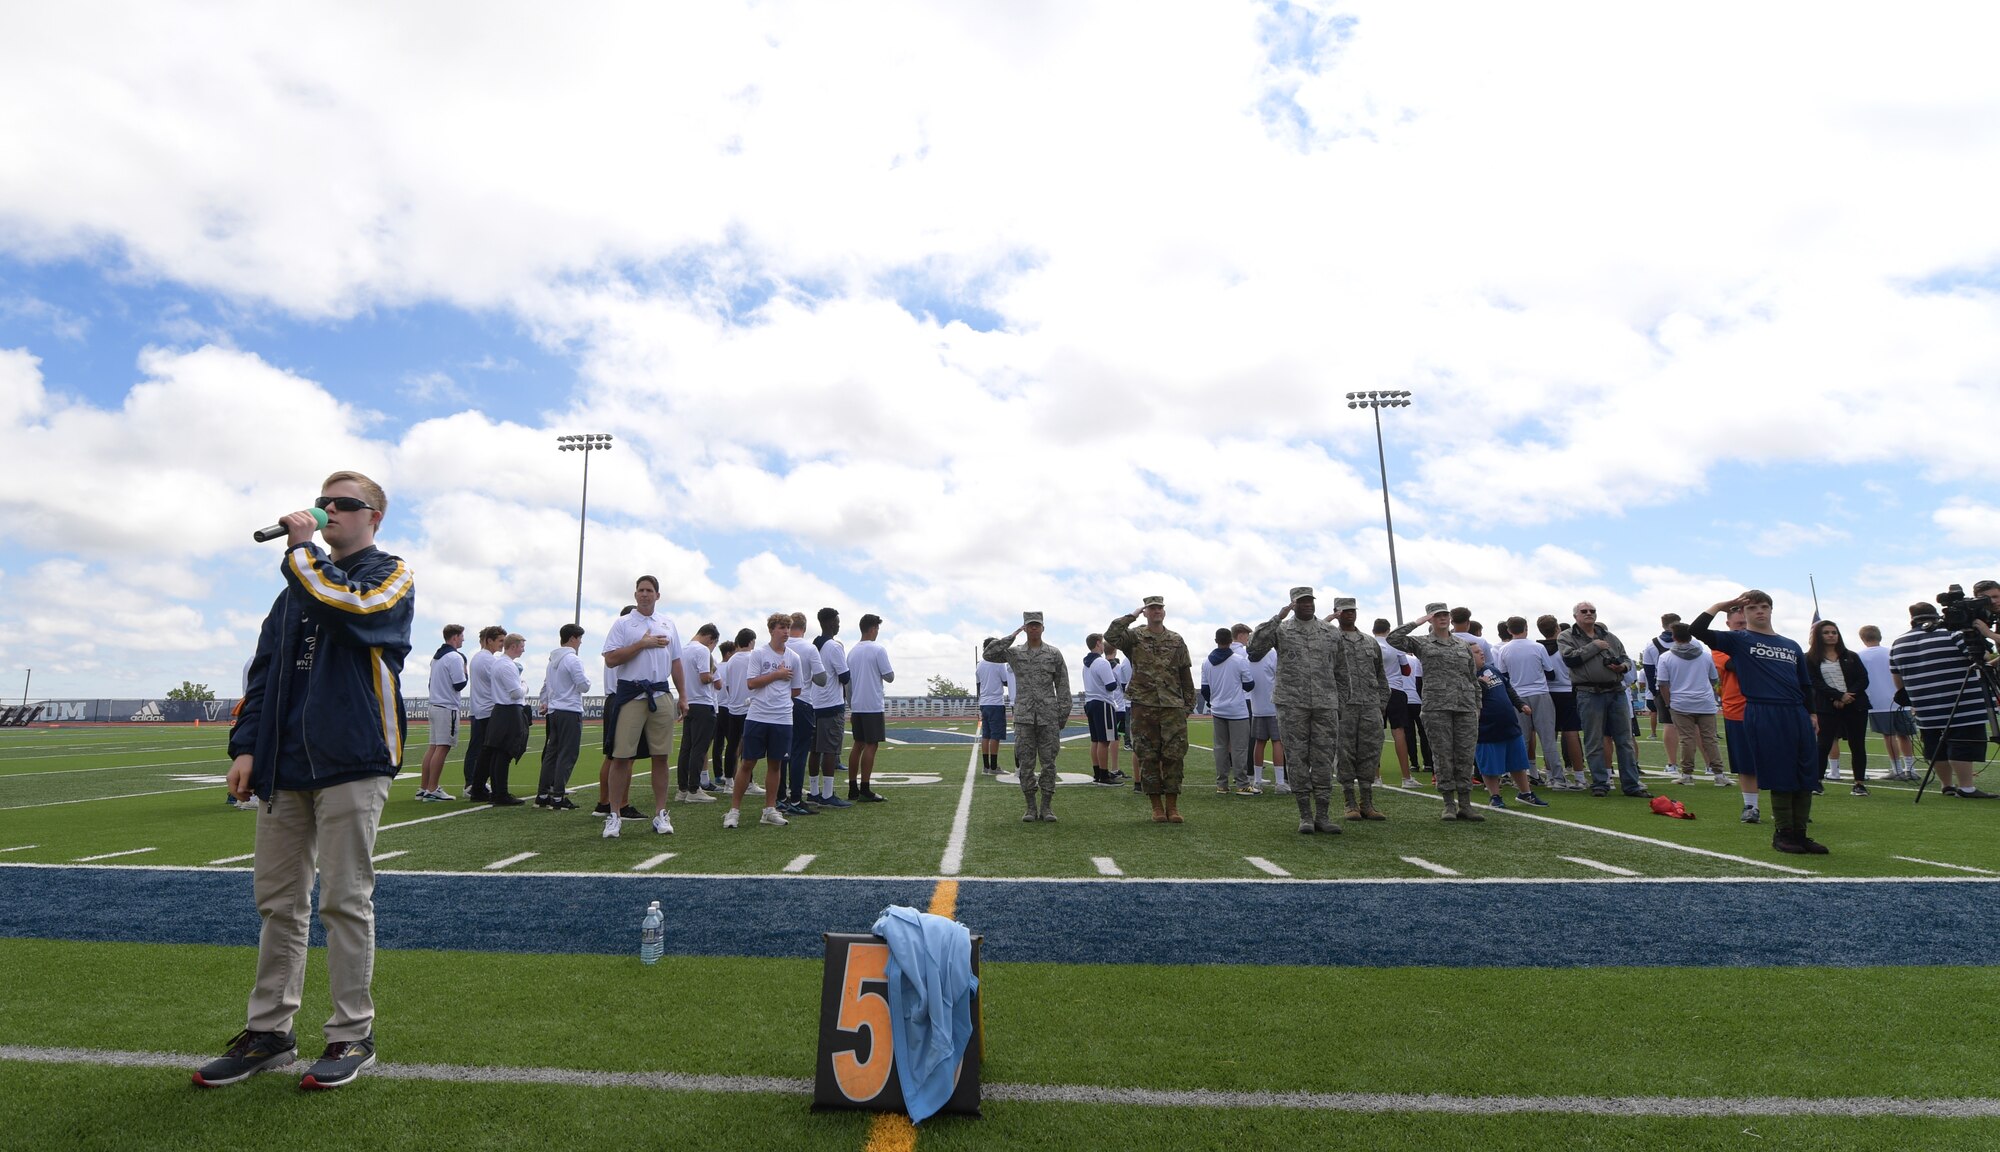 Conor Long sings the national anthem as members of Team Buckley render a salute June 22, 2019, in Highlands Ranch, Colorado.